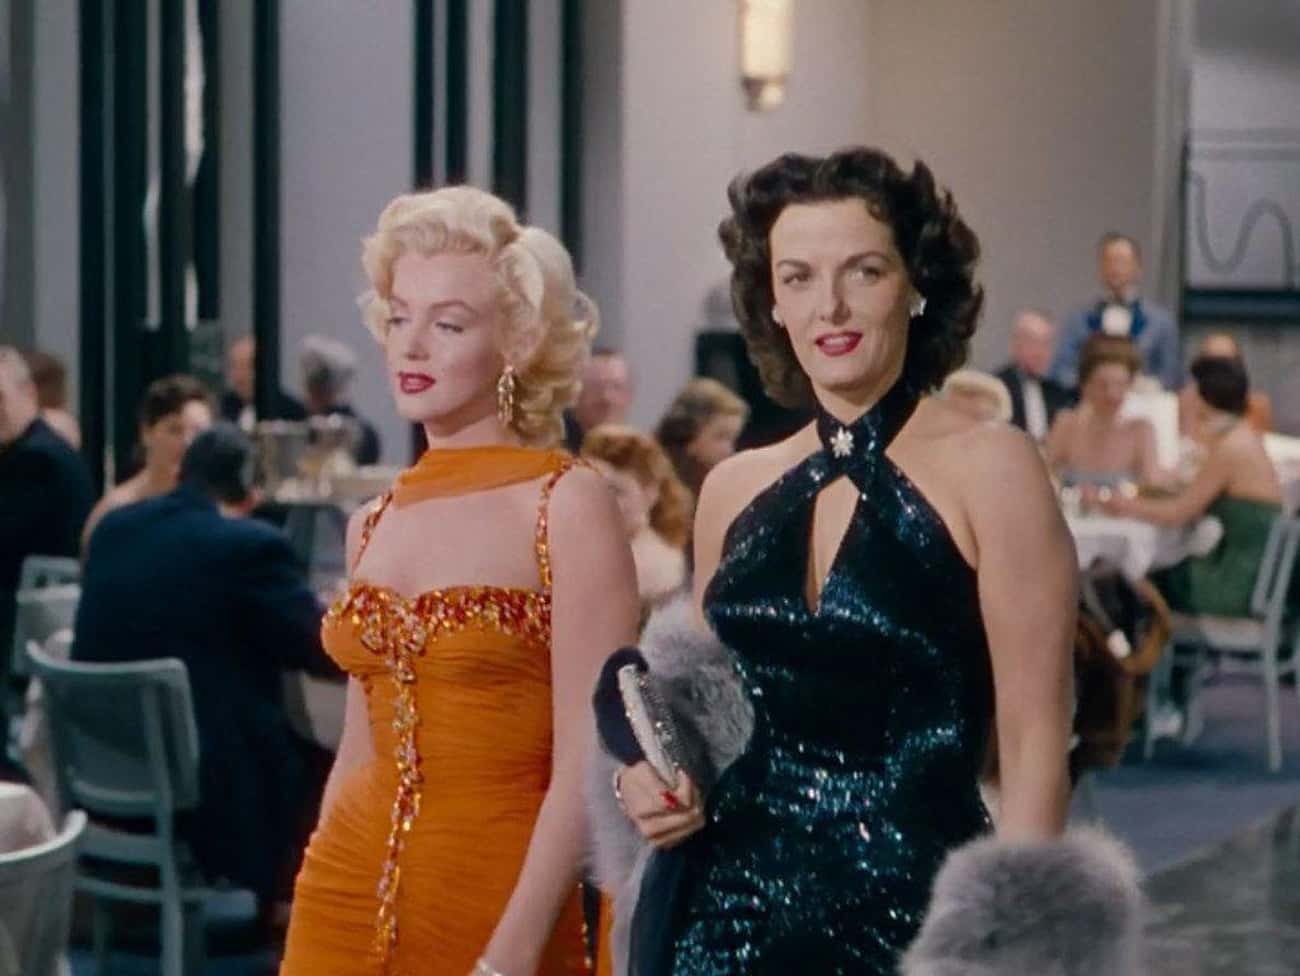 What It's Like To Work With Marilyn Monroe, According To Her Costars